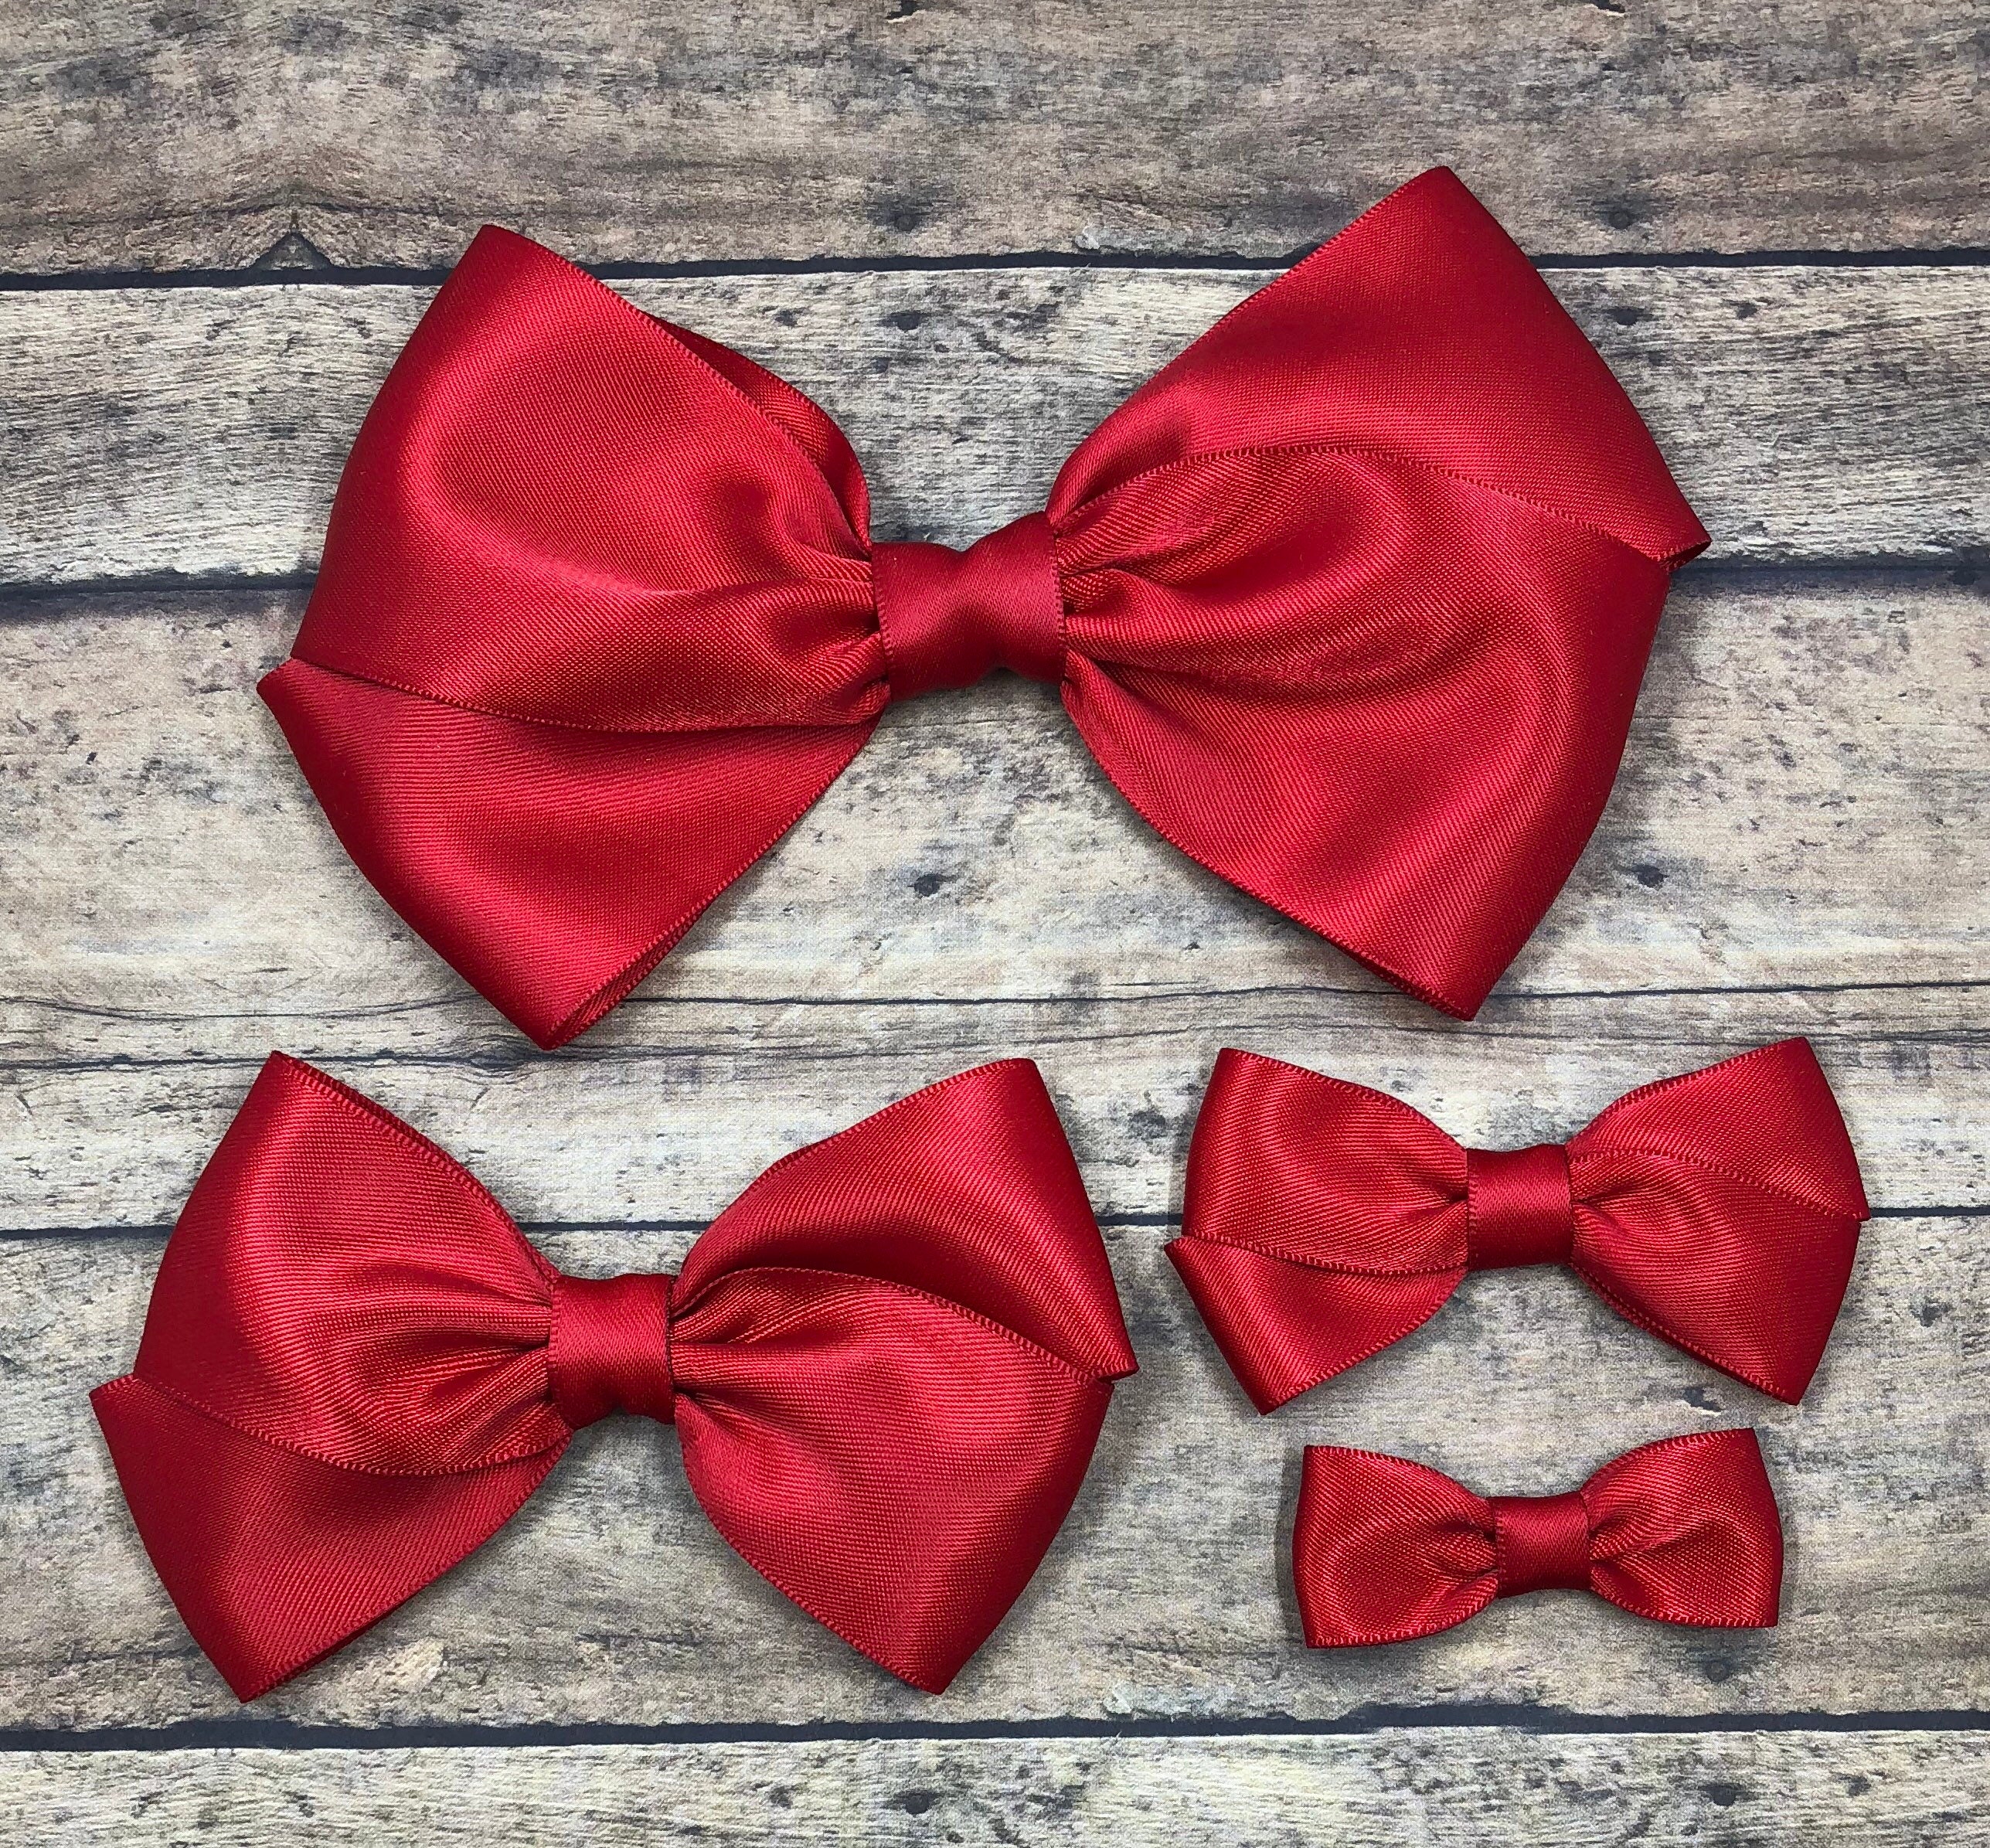 AIMUDI Pre-Tied Red Satin Bows for Valentine's Day 3 Premade Ribbon Bows  with Heart Rhinestone Red Bows for Gift Wrapping Small Bows for Crafts